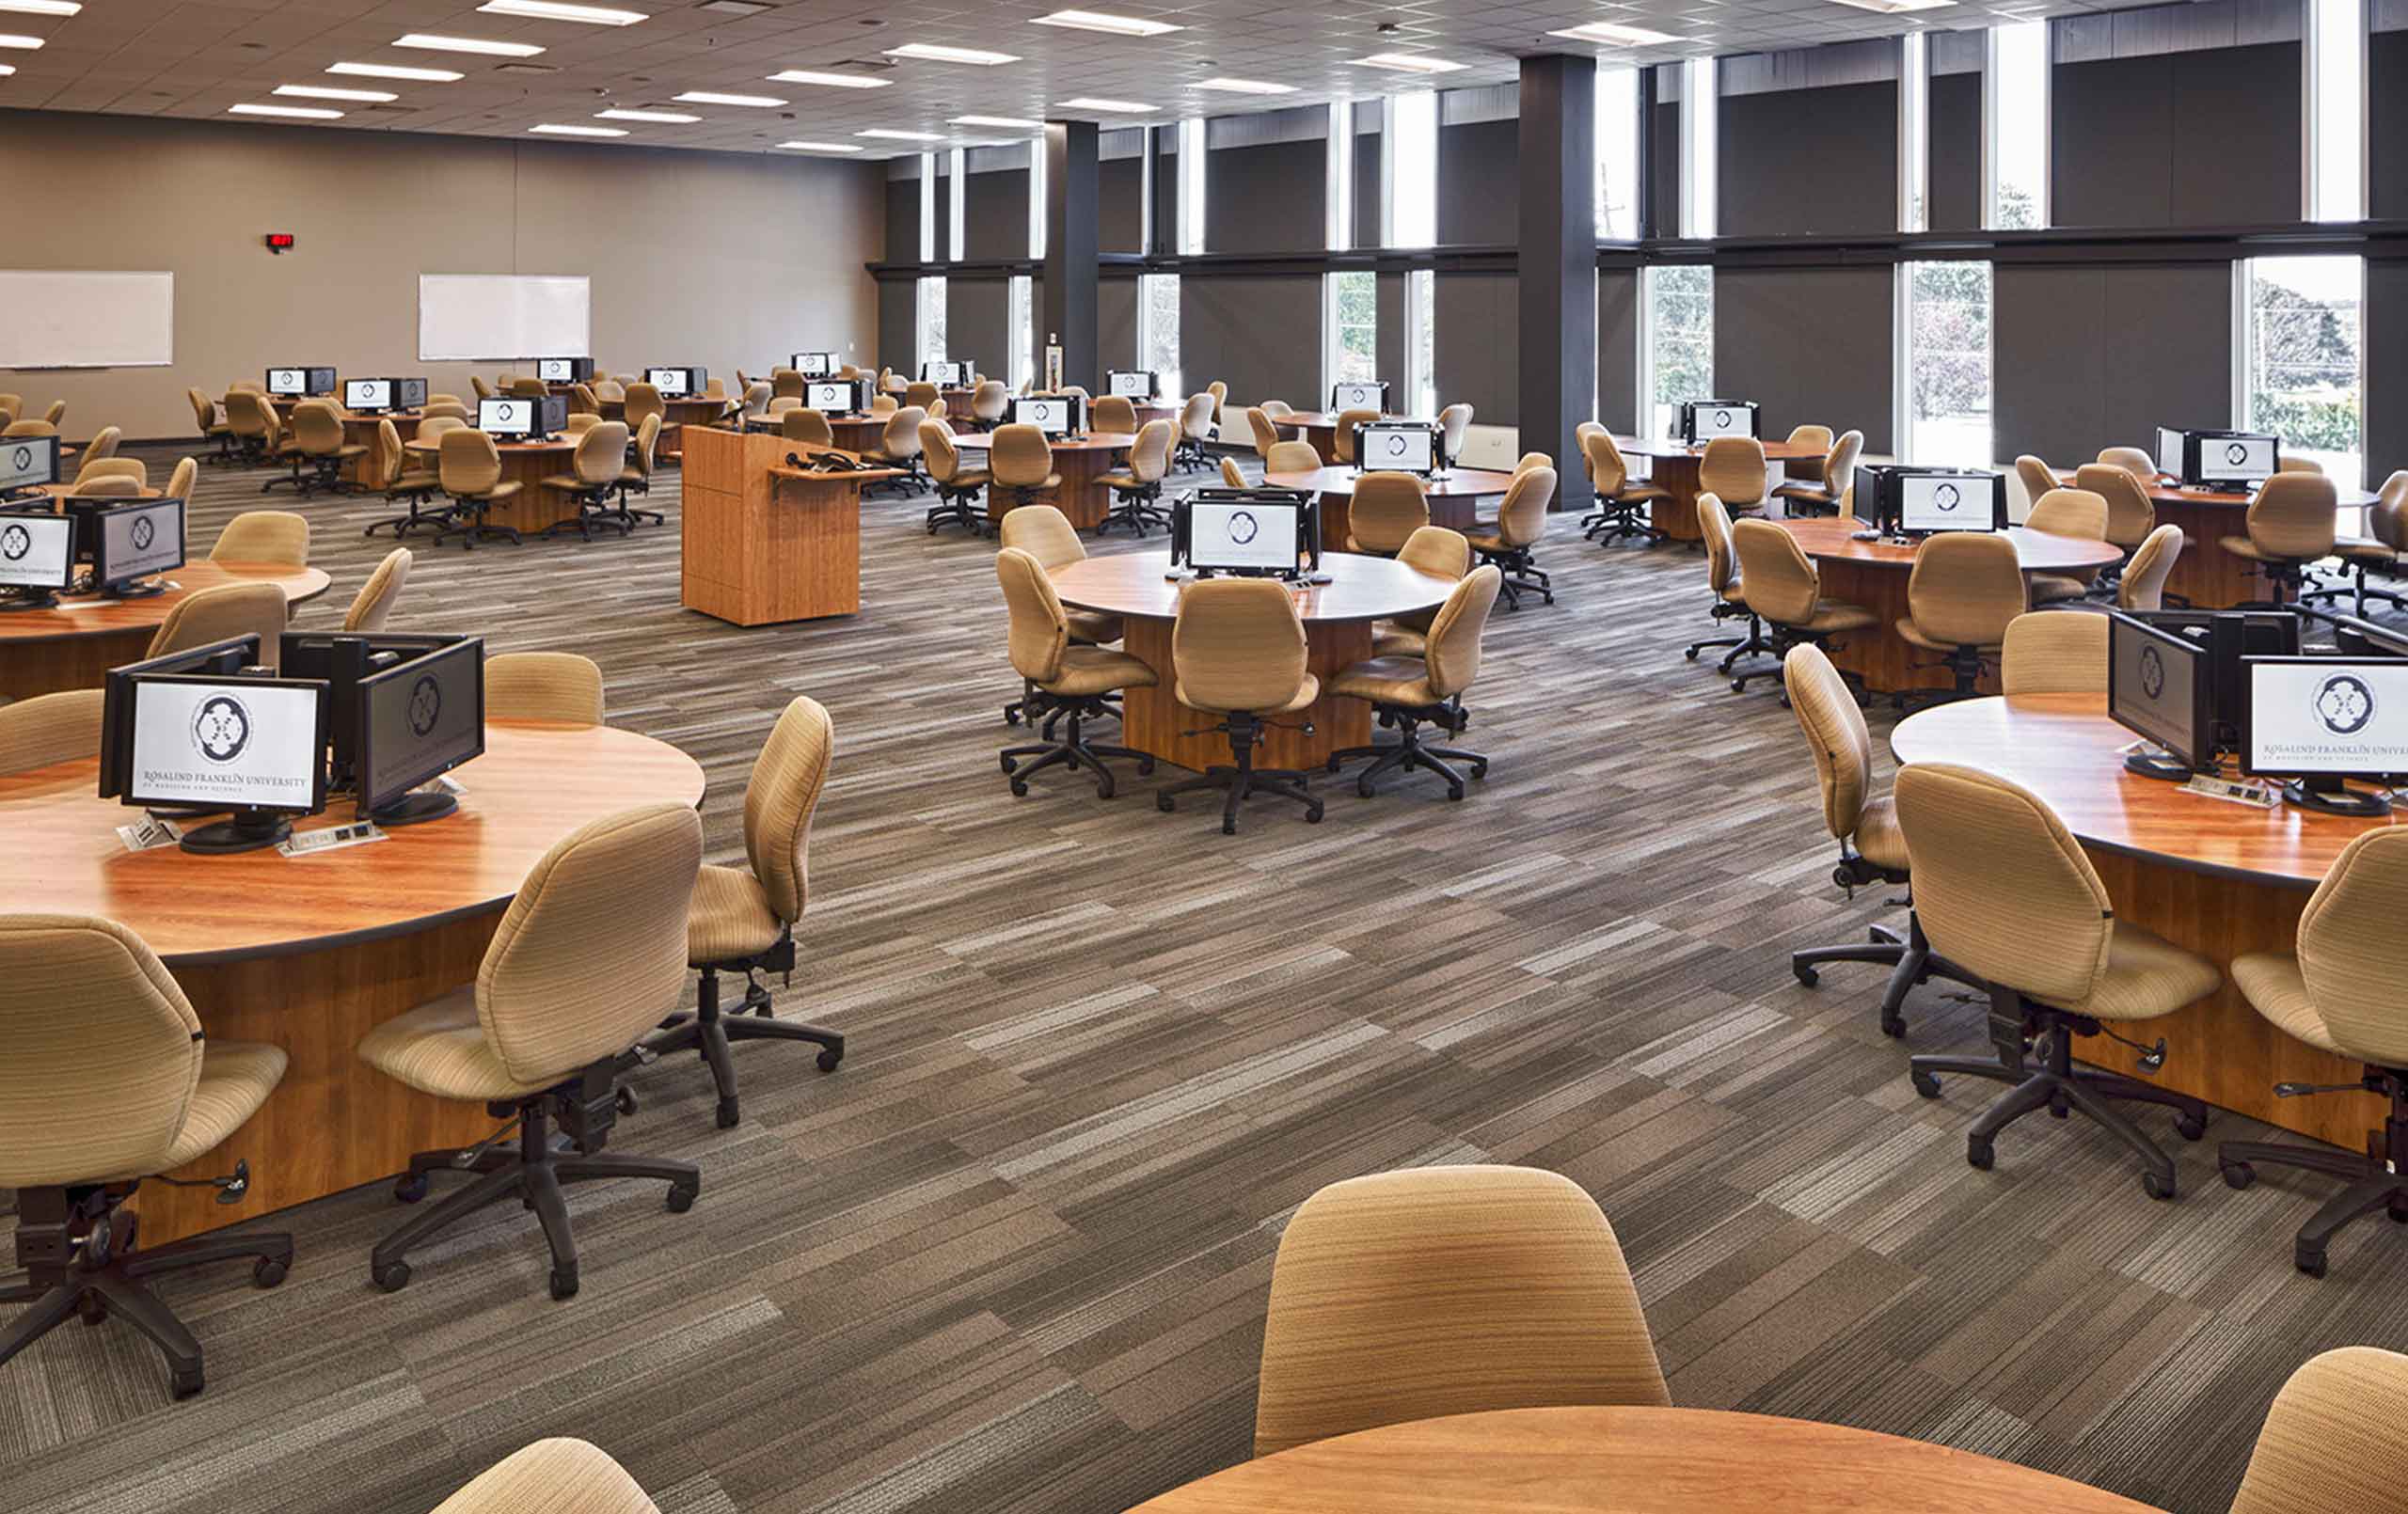 Interior of Rosalind Franklin University Centennial Center - large room with circular desks and computers. 